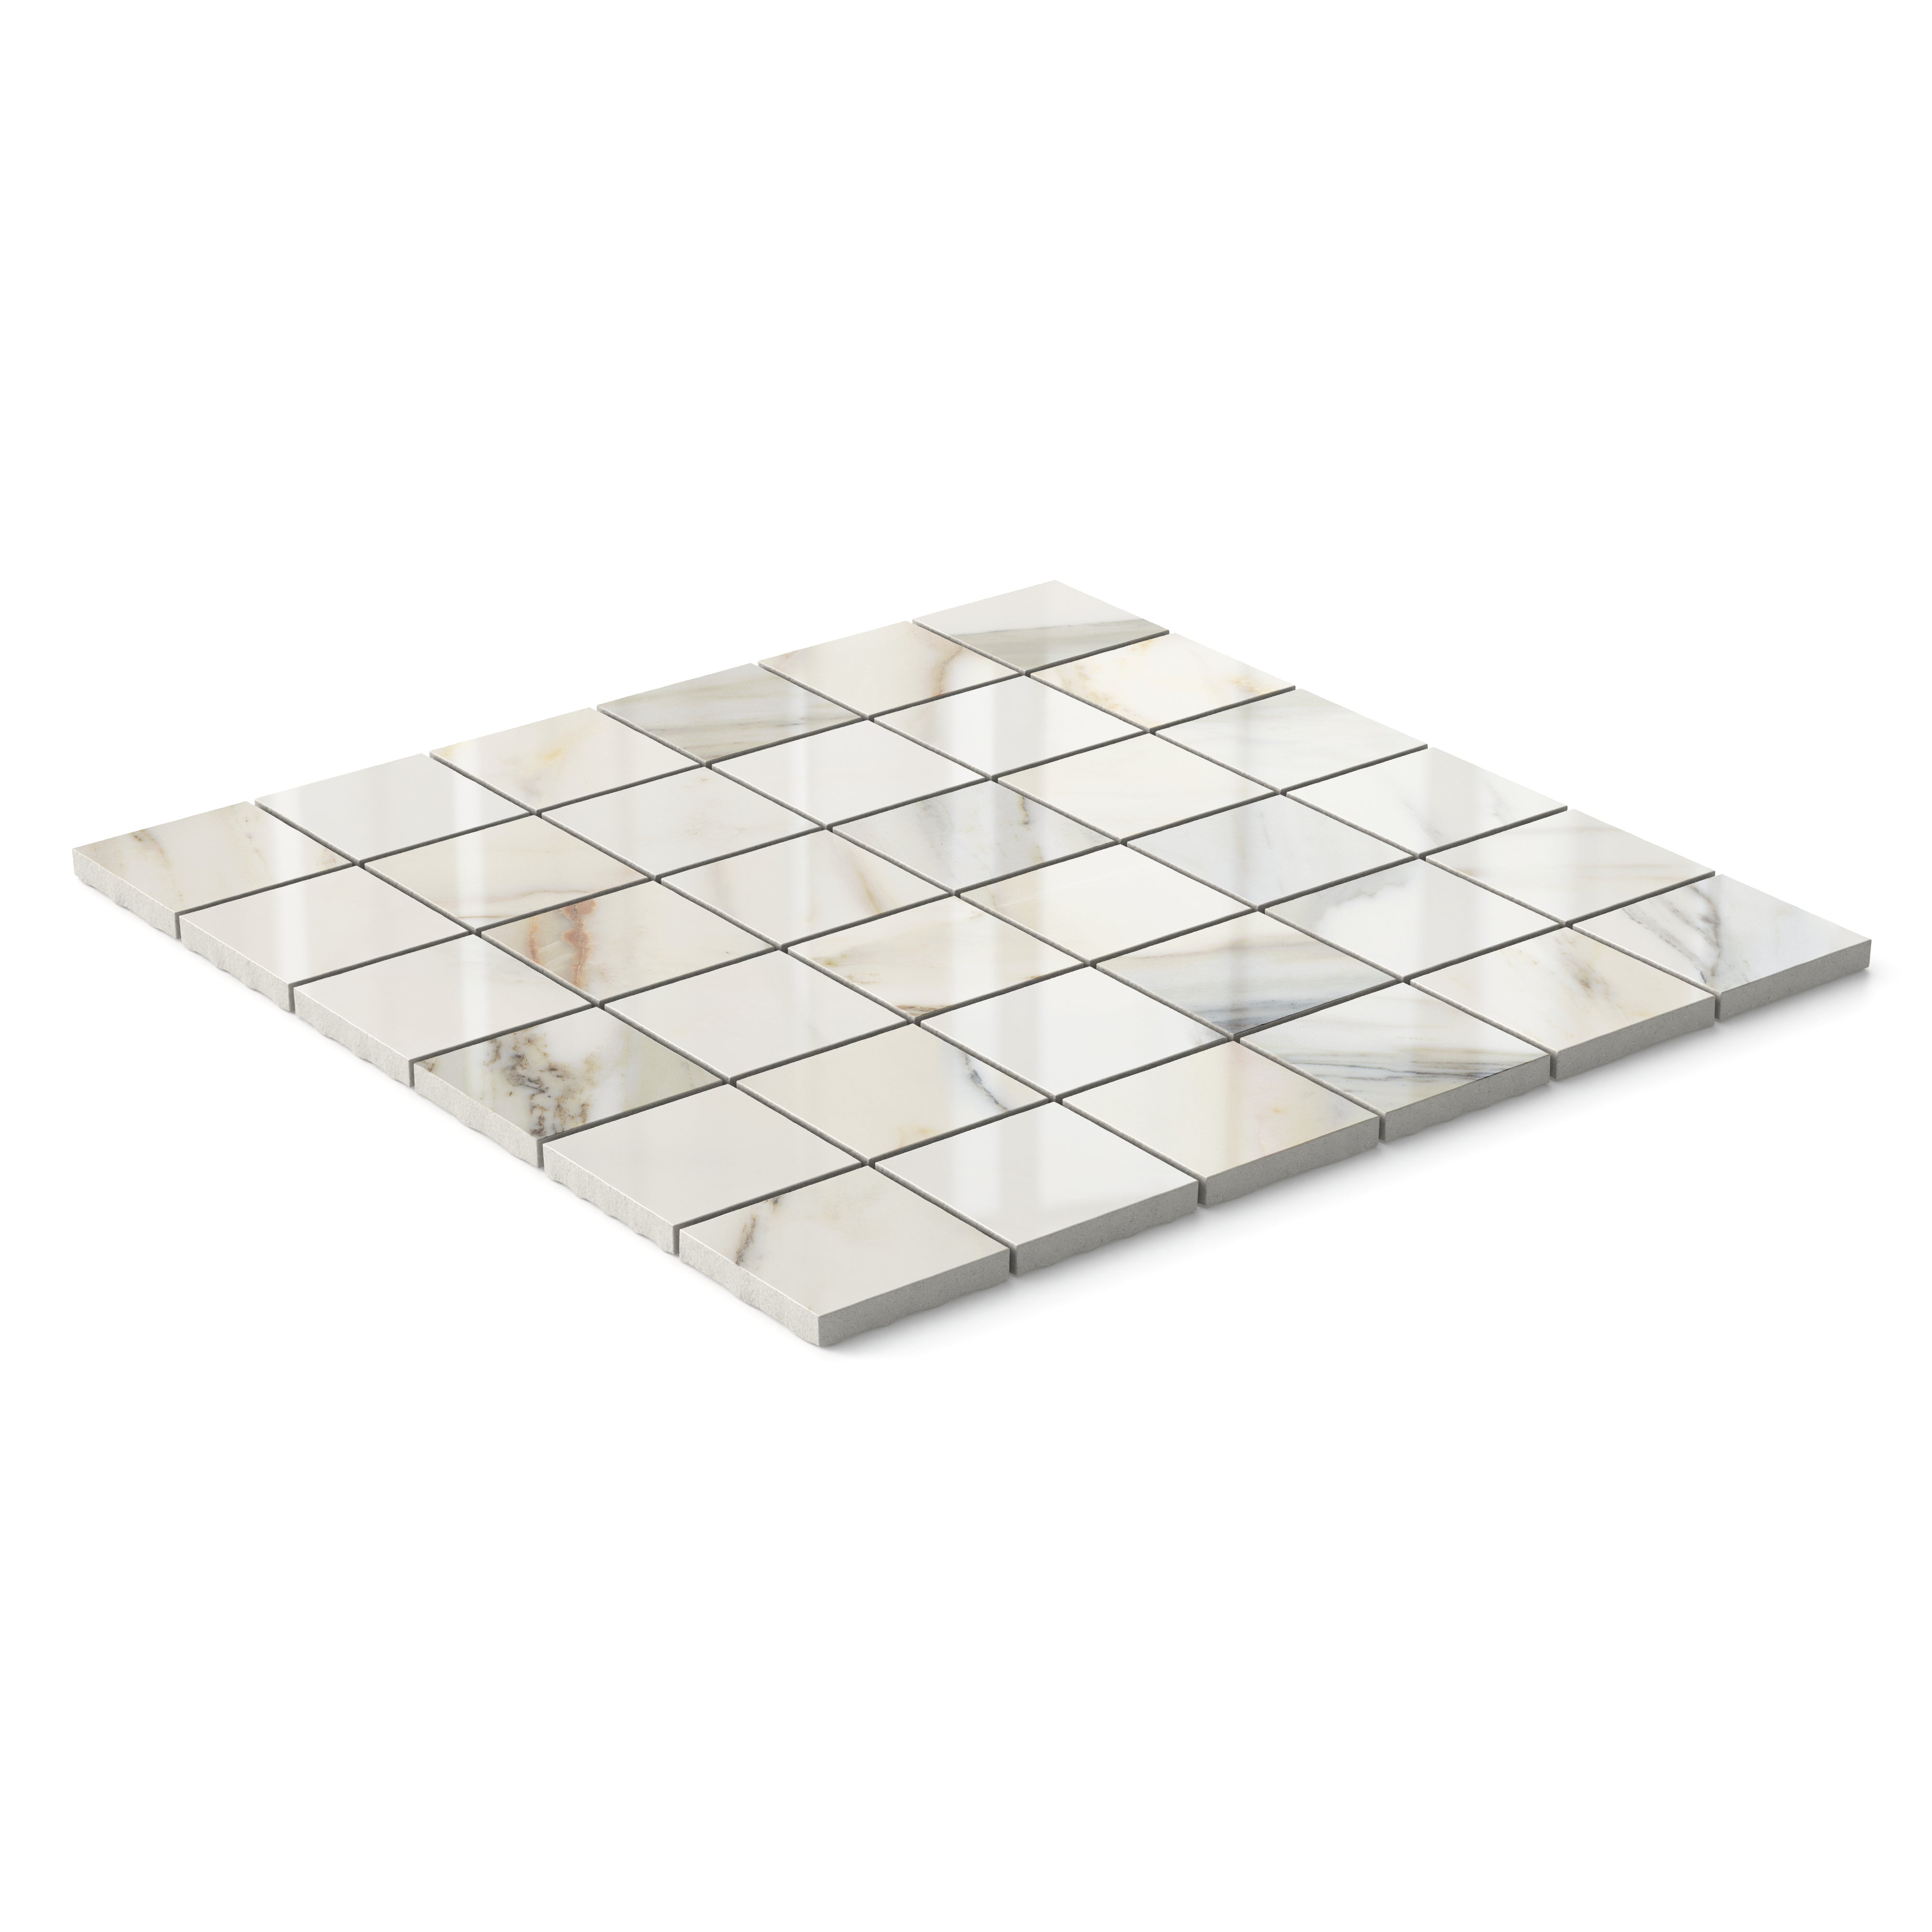 Aniston 2x2 Polished Porcelain Mosaic Tile in Calacatta Cremo